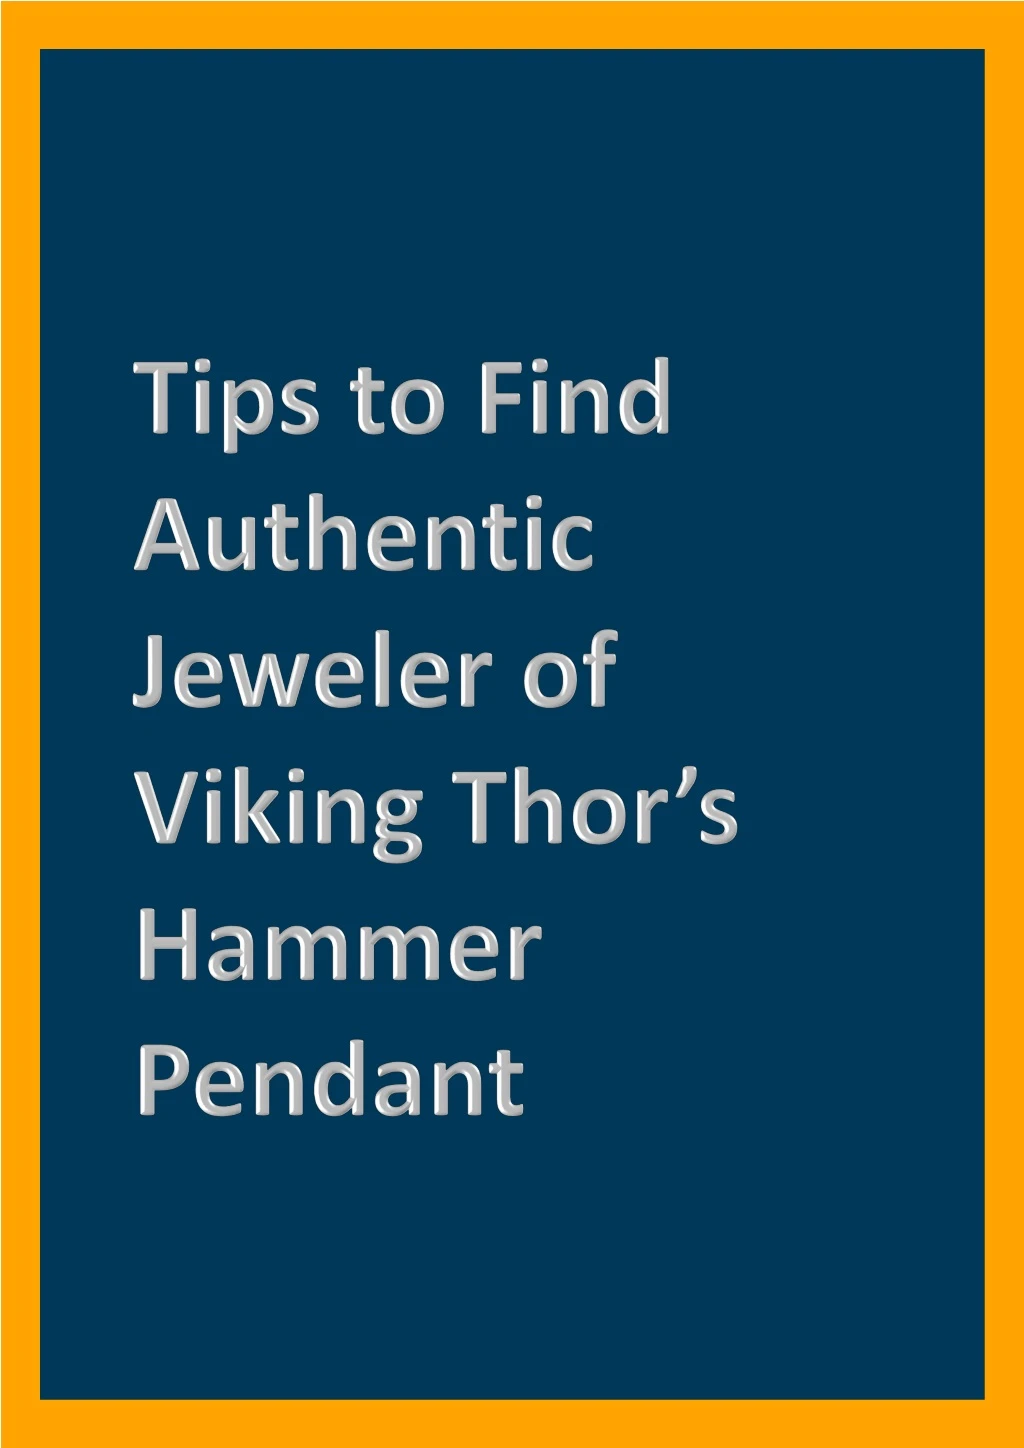 tips to find authentic jeweler of viking thor